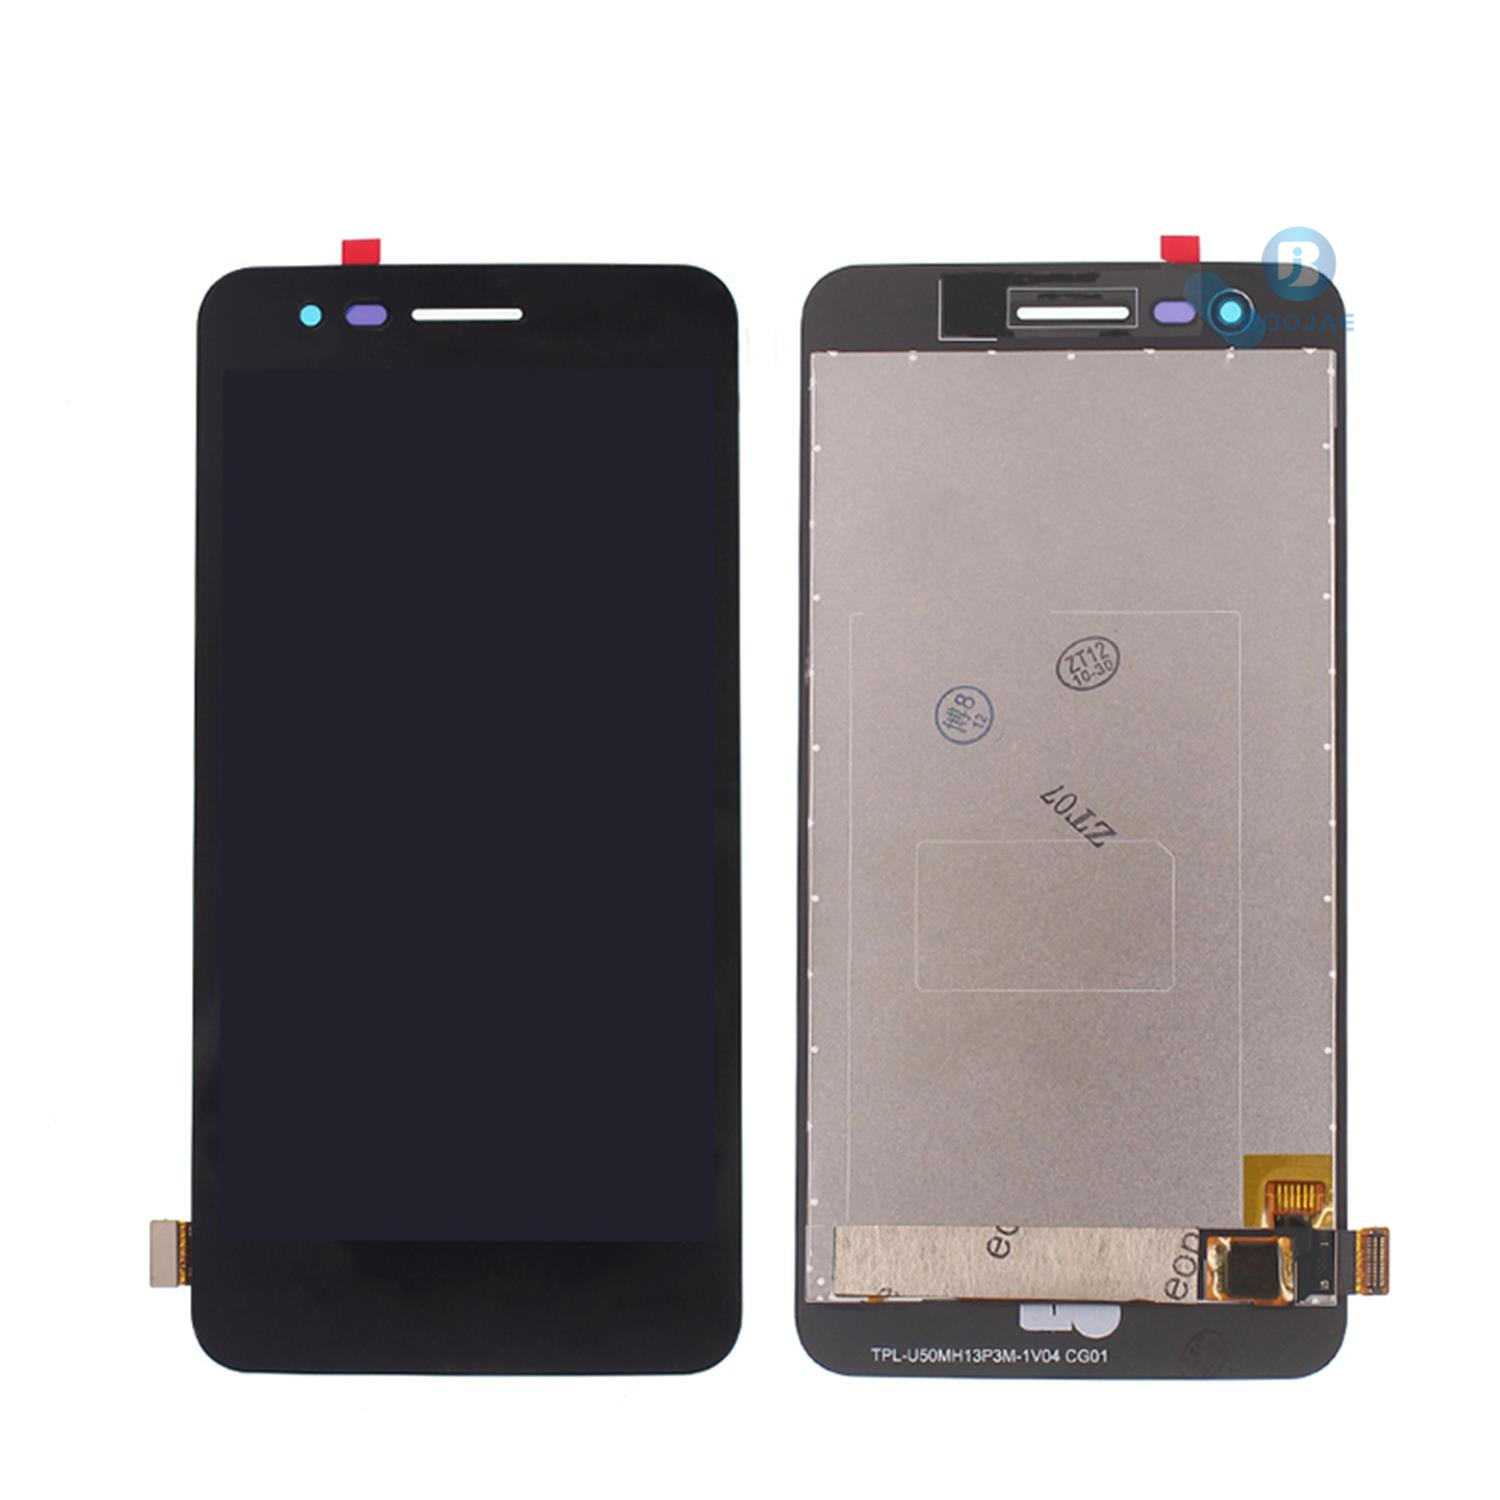 For LG K4 2017 LCD Screen Display and Touch Panel Digitizer Assembly Replacement